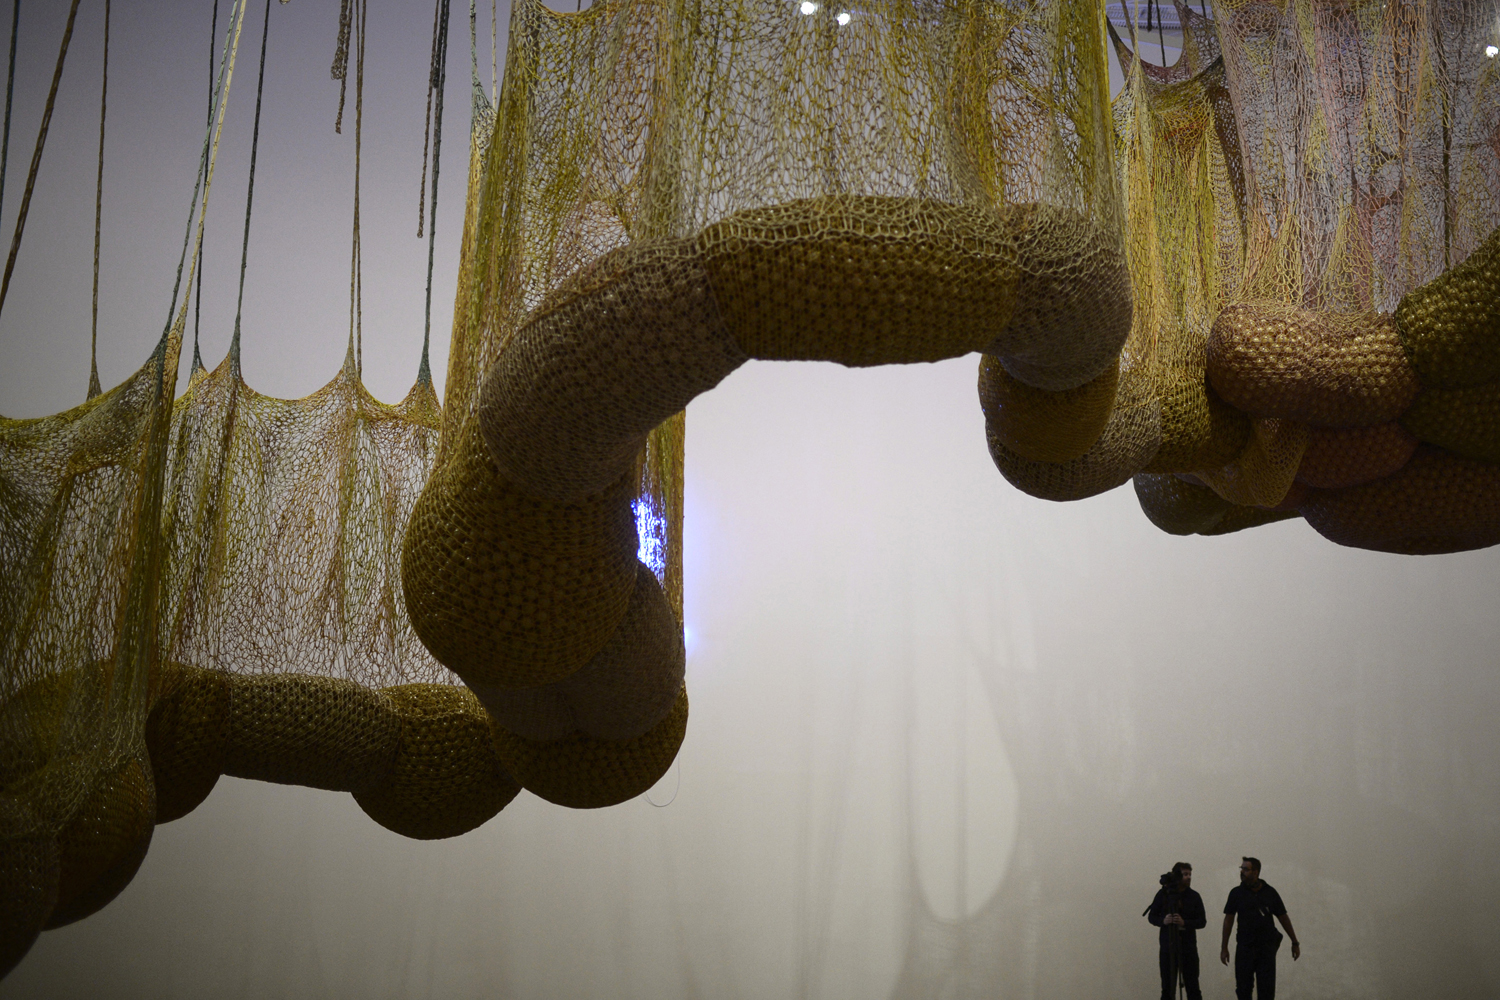 Feb. 13, 2014. Visitors stand under  Life Is A Body We Are Part Of,  a giant biomorphic sculpture that forms part of a retrospective of the work of Brazilian artist Ernesto Neto, at the Guggenheim Museum in Bilbao.